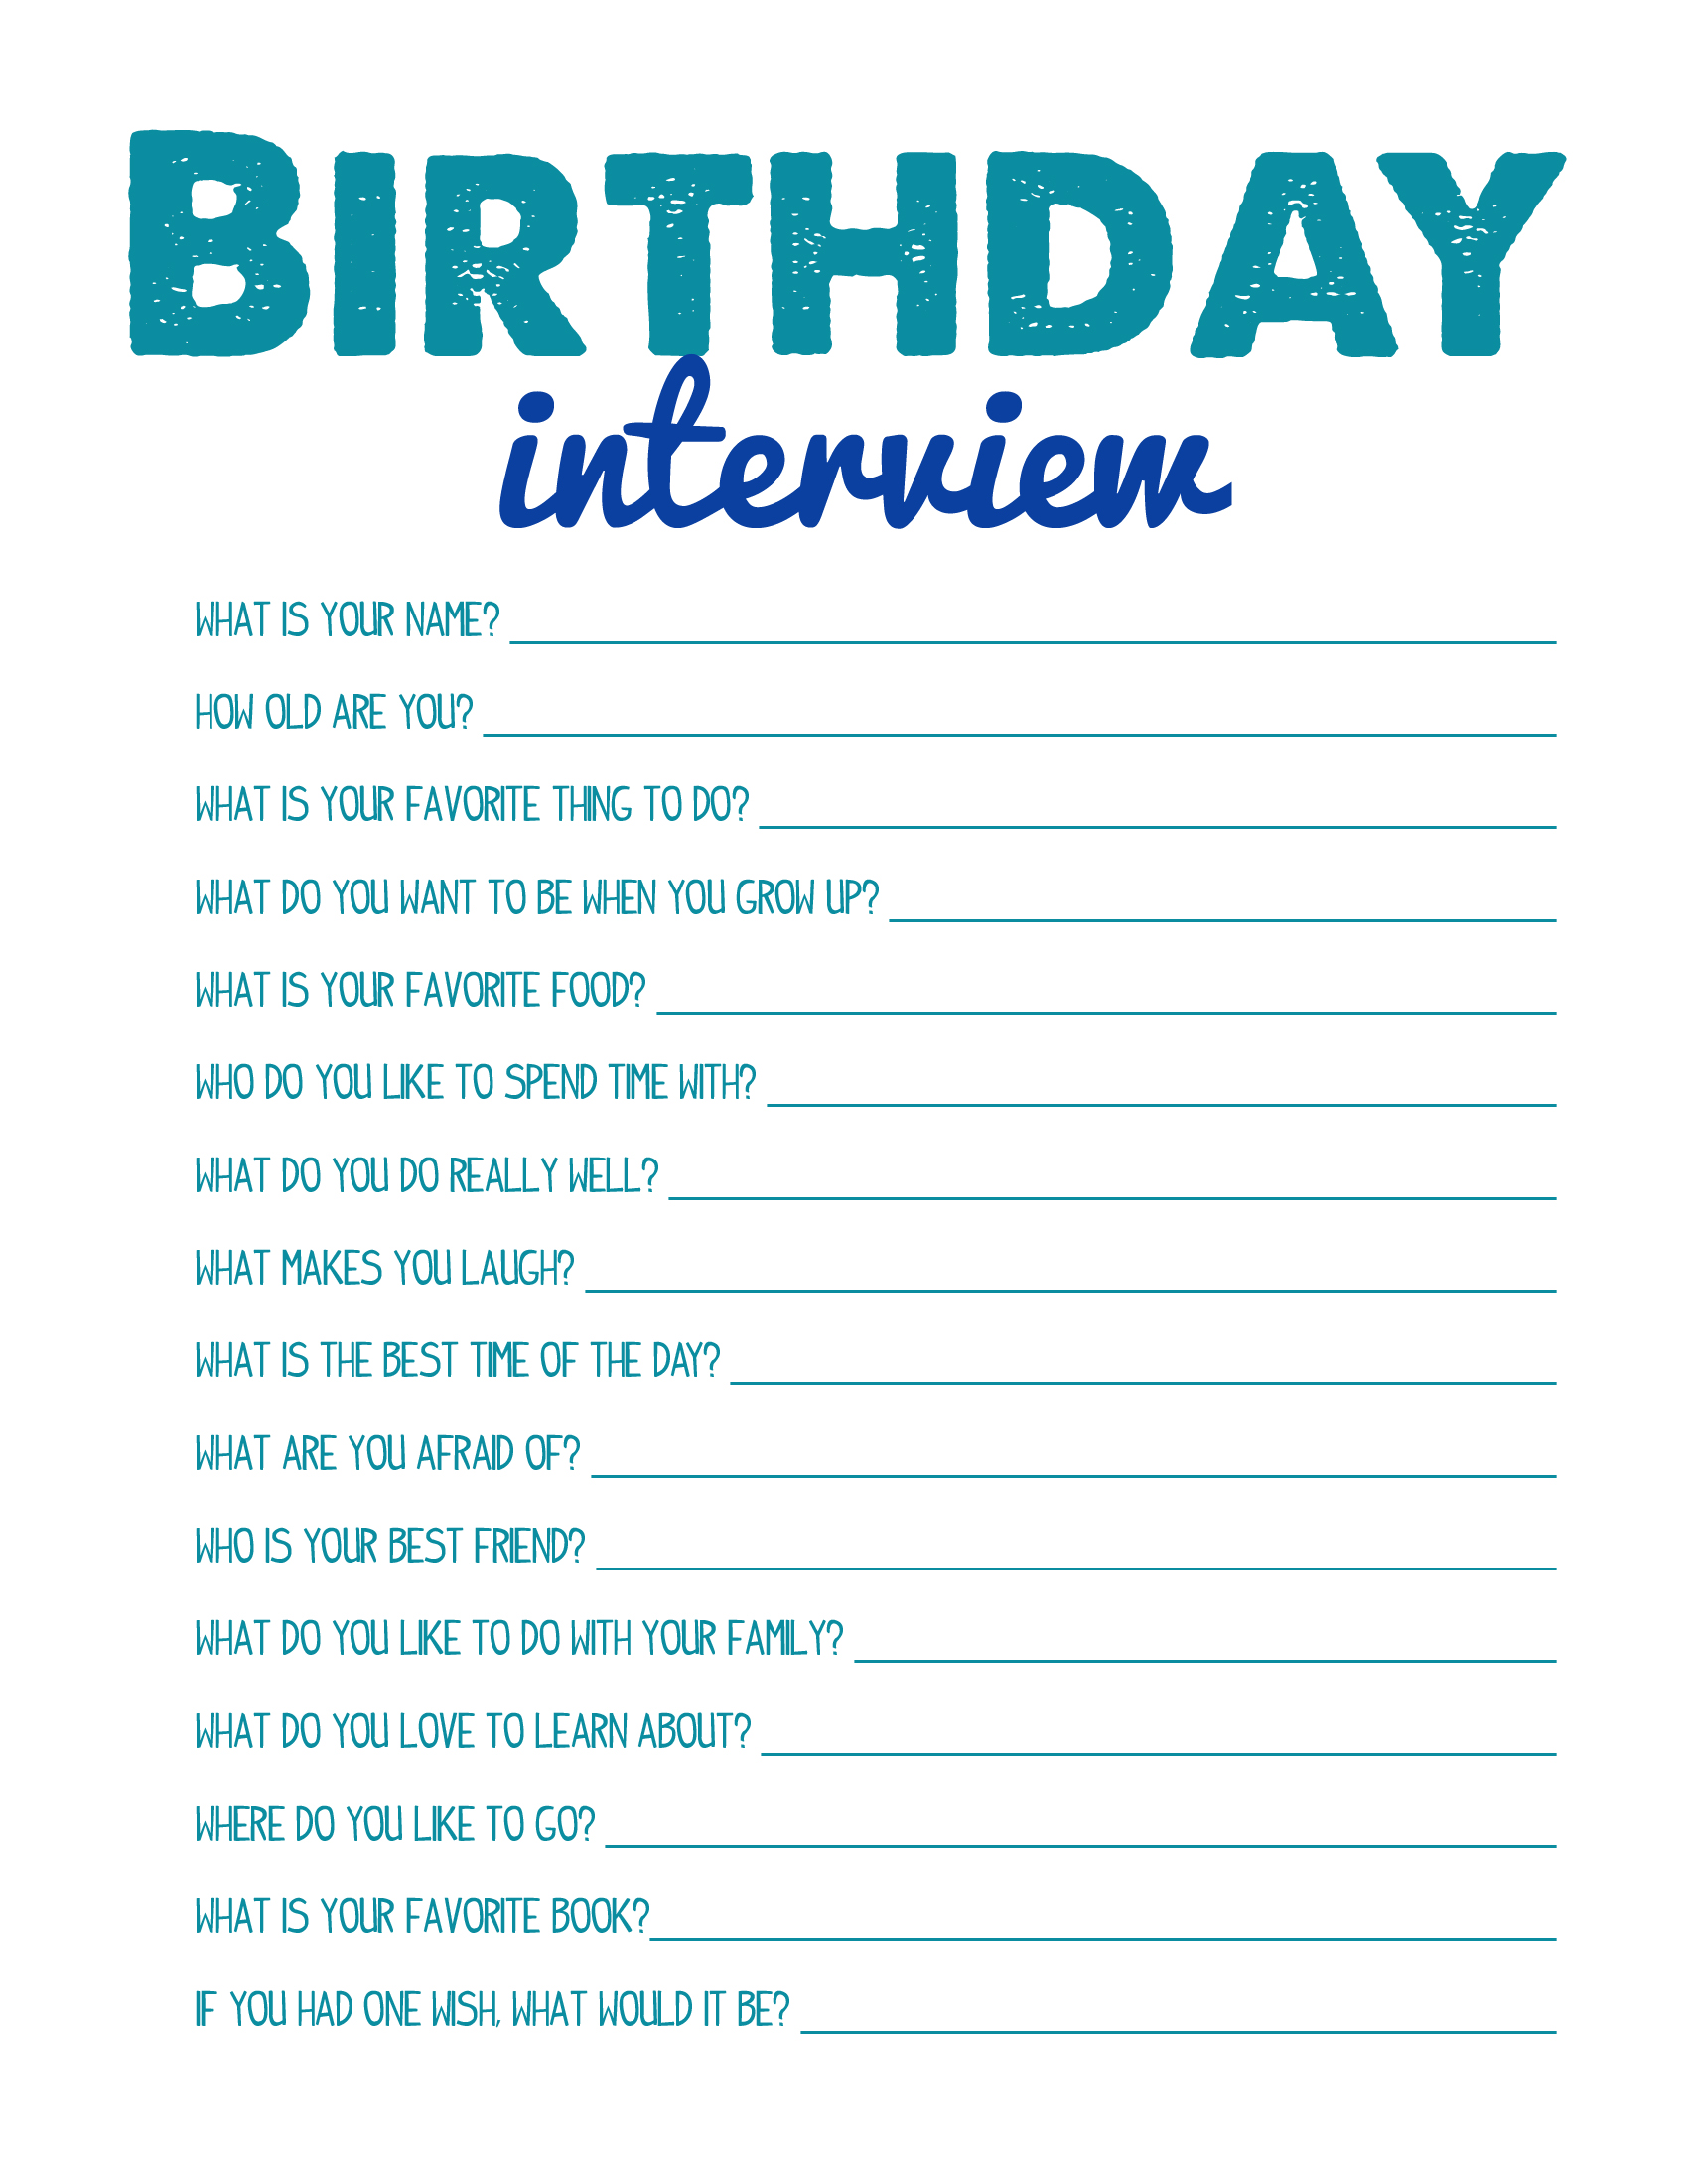 Birthday Printable Images Gallery Category Page 10 Printablee